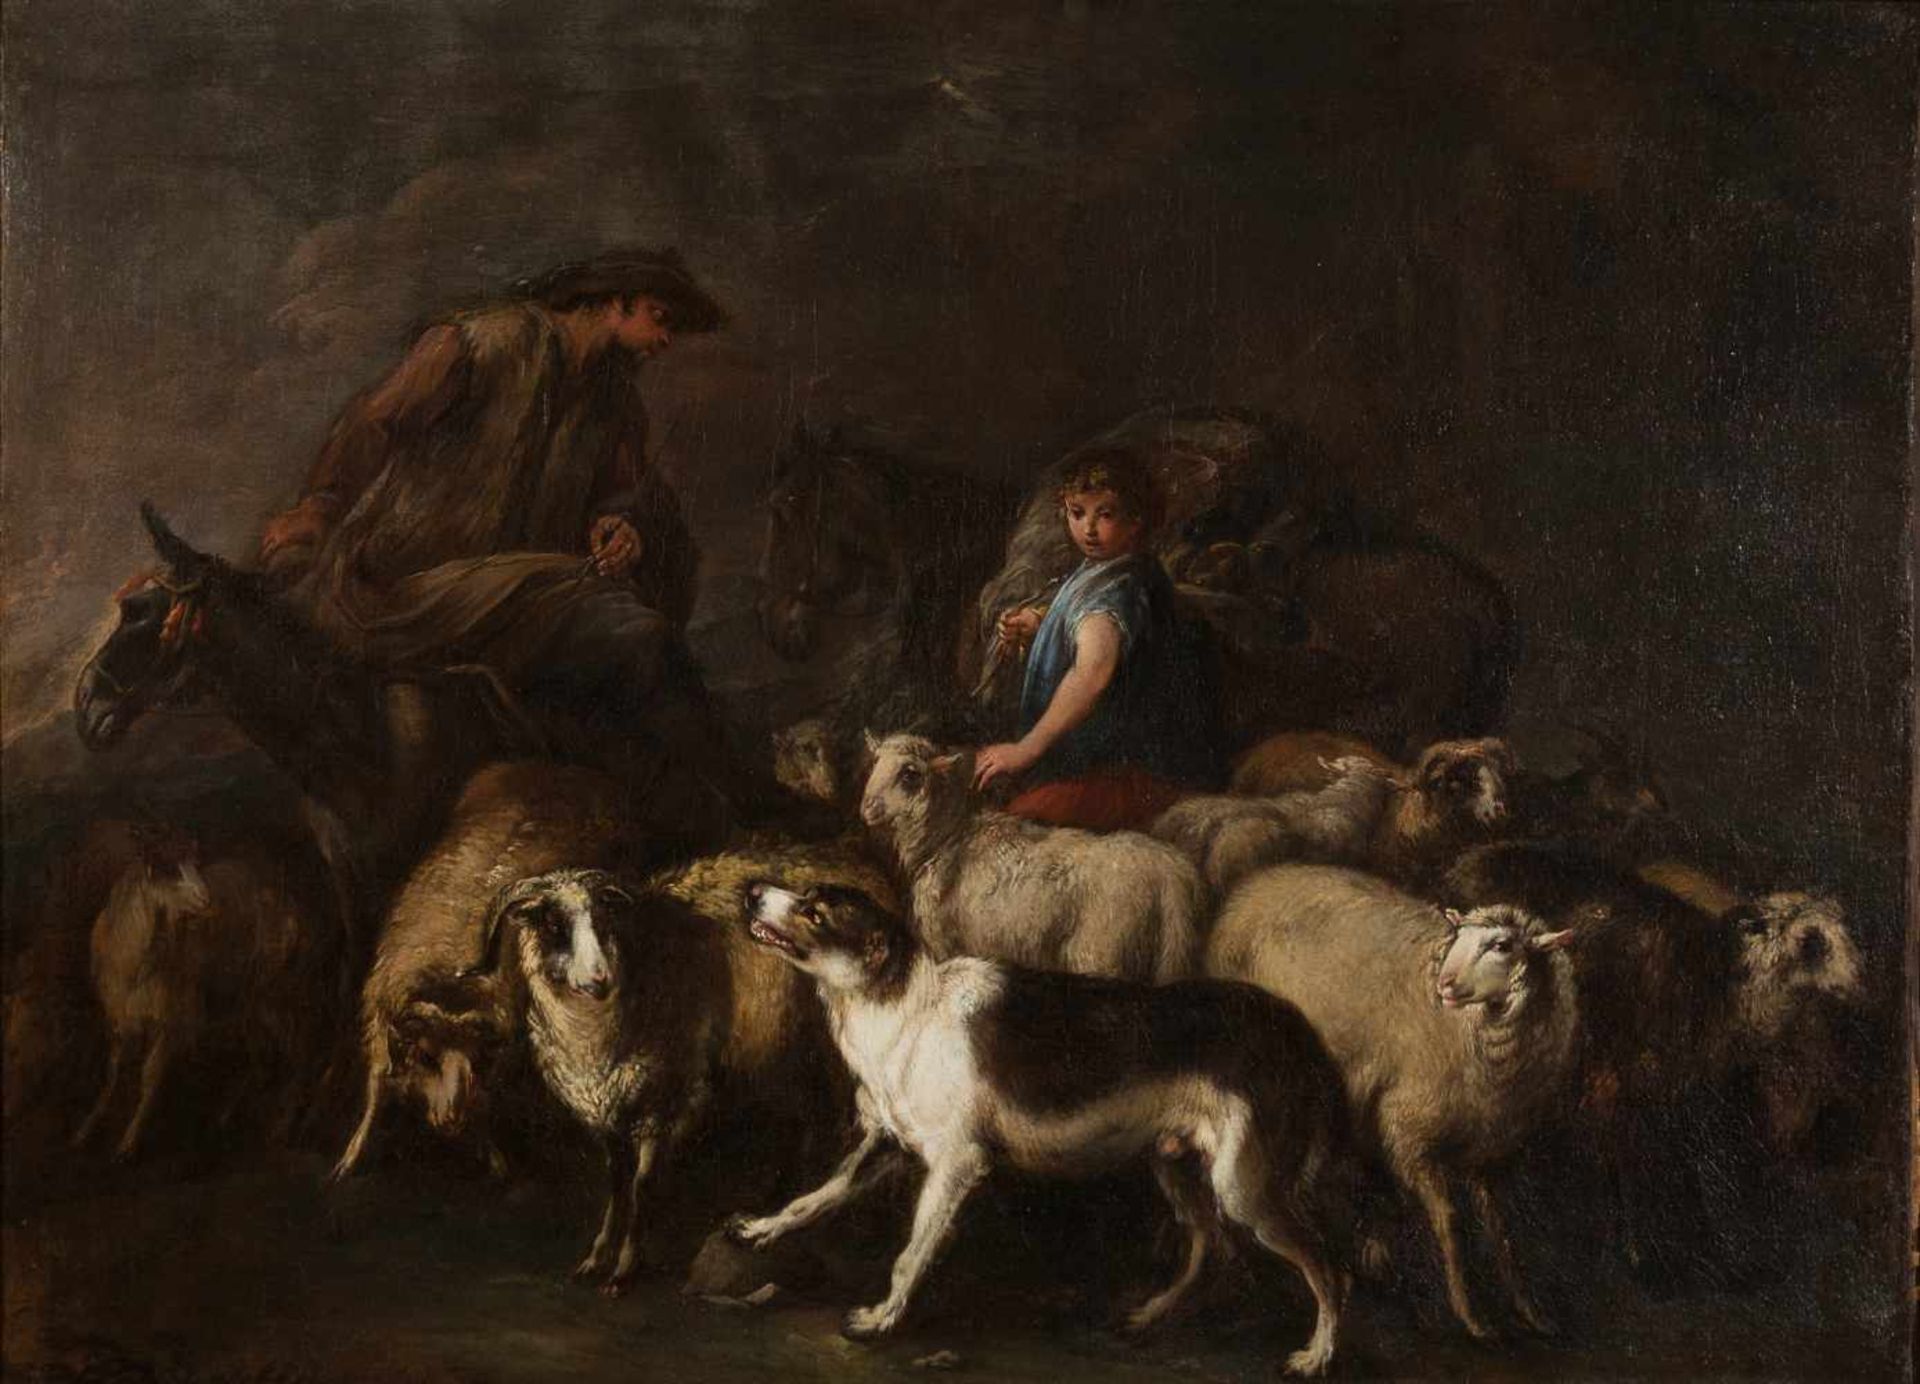 17th century Italian School "Pastoral scene" Oil on canvas. 76 x 105 cm. Both the theme and the